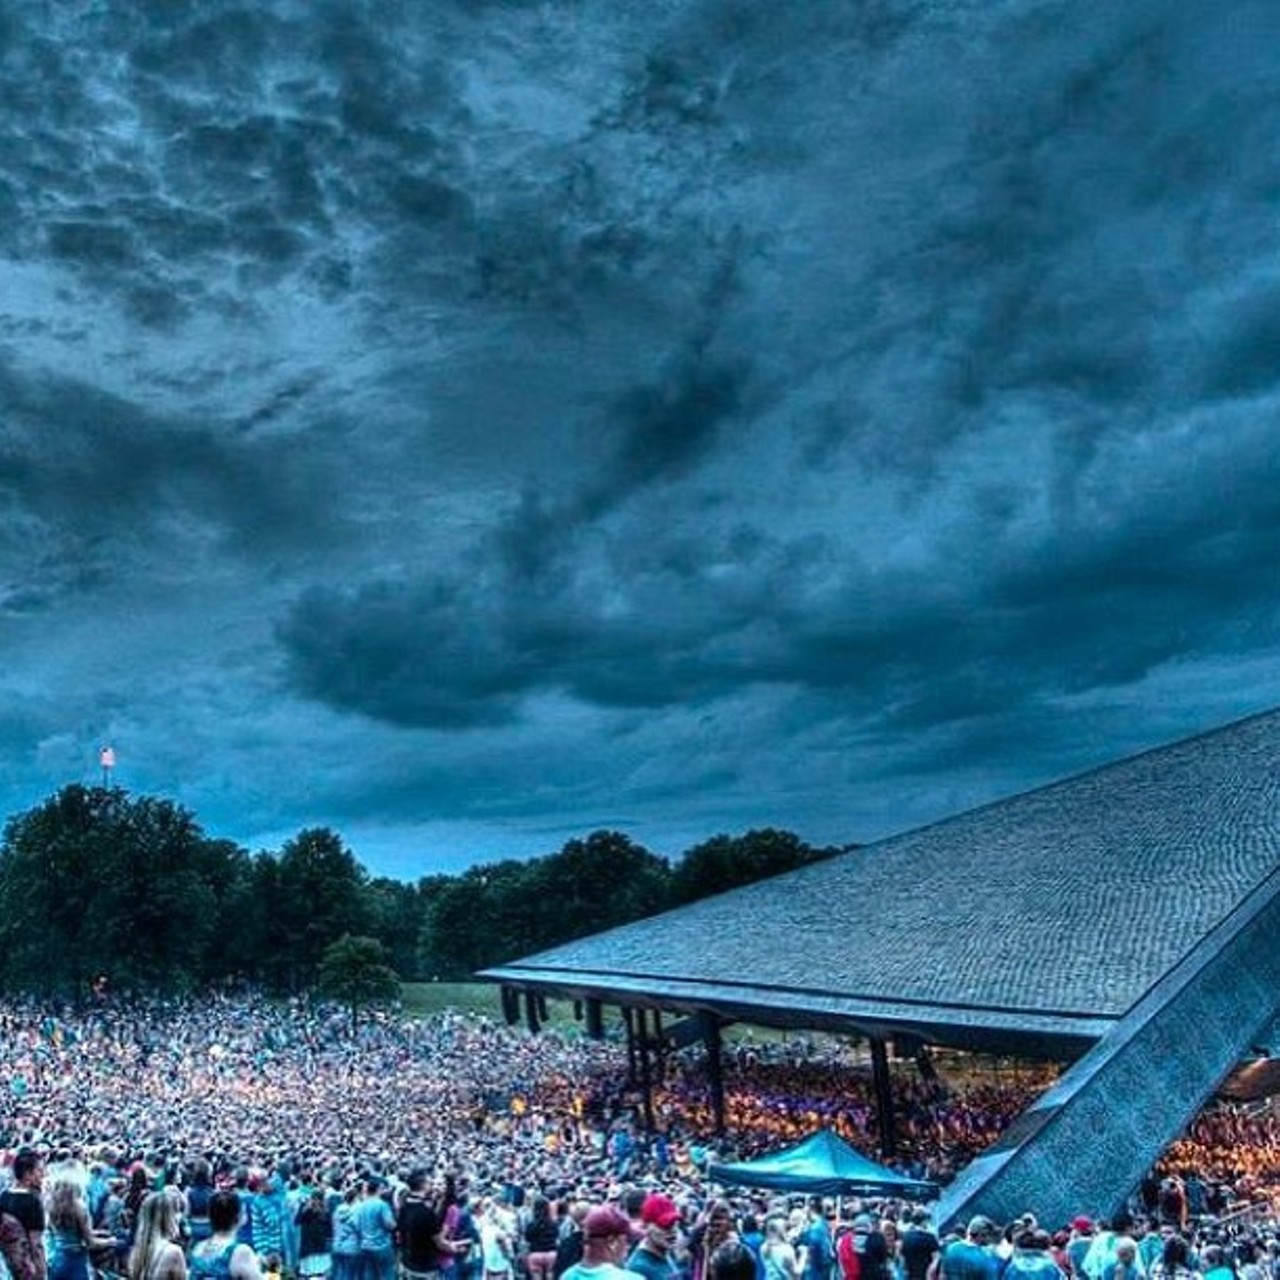 Just another night at Blossom Music Center